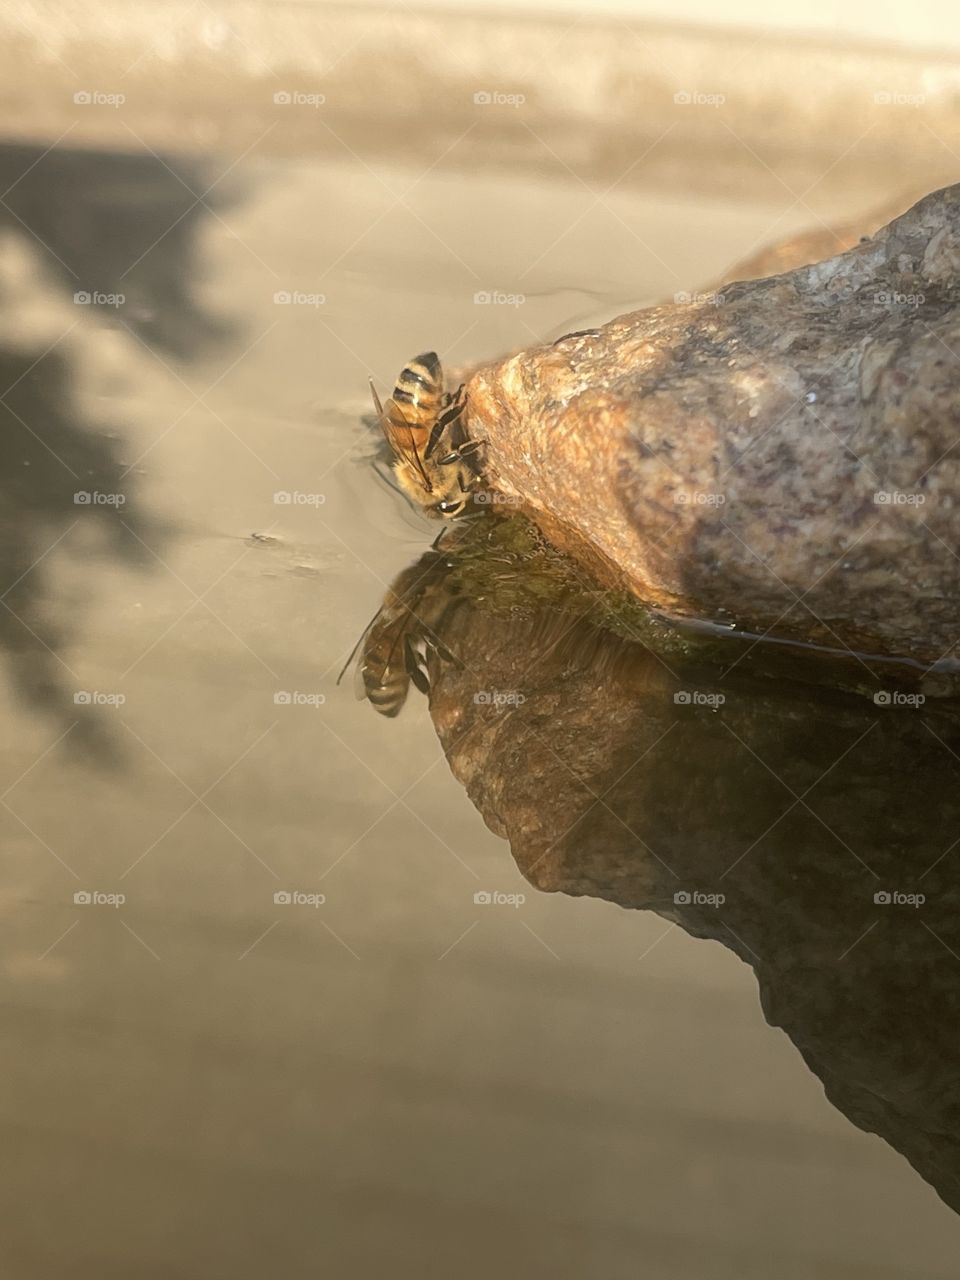 A bee drinking. Reflection. Bird bath. Save the bees!